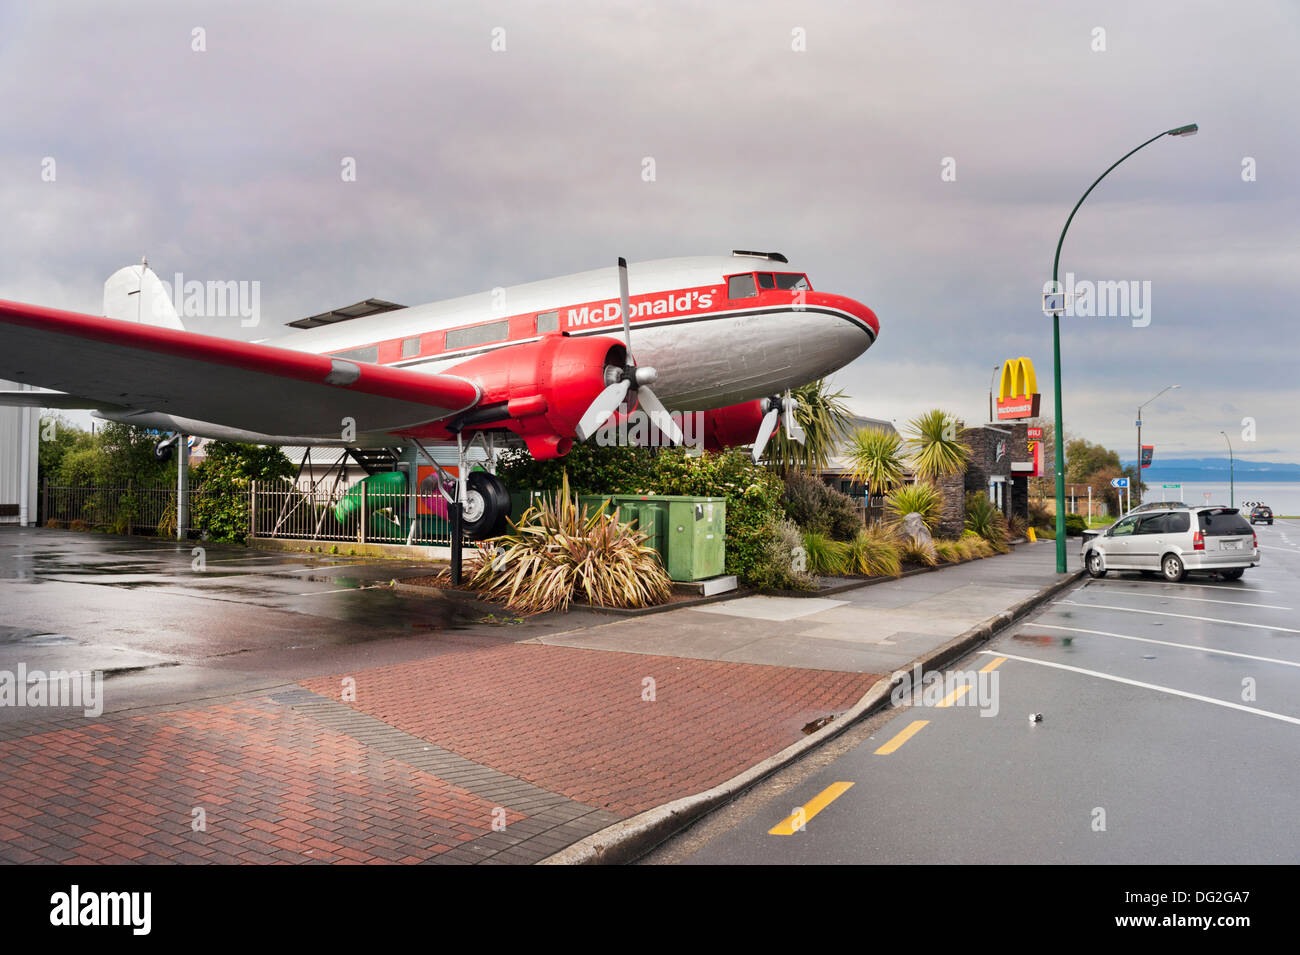 Taupo, North Island, New Zealand. McDonald's restaurant, Taupo with DC3 Dakota aircraft. Reputedly voted coolest McDonald's in the world. Stock Photo